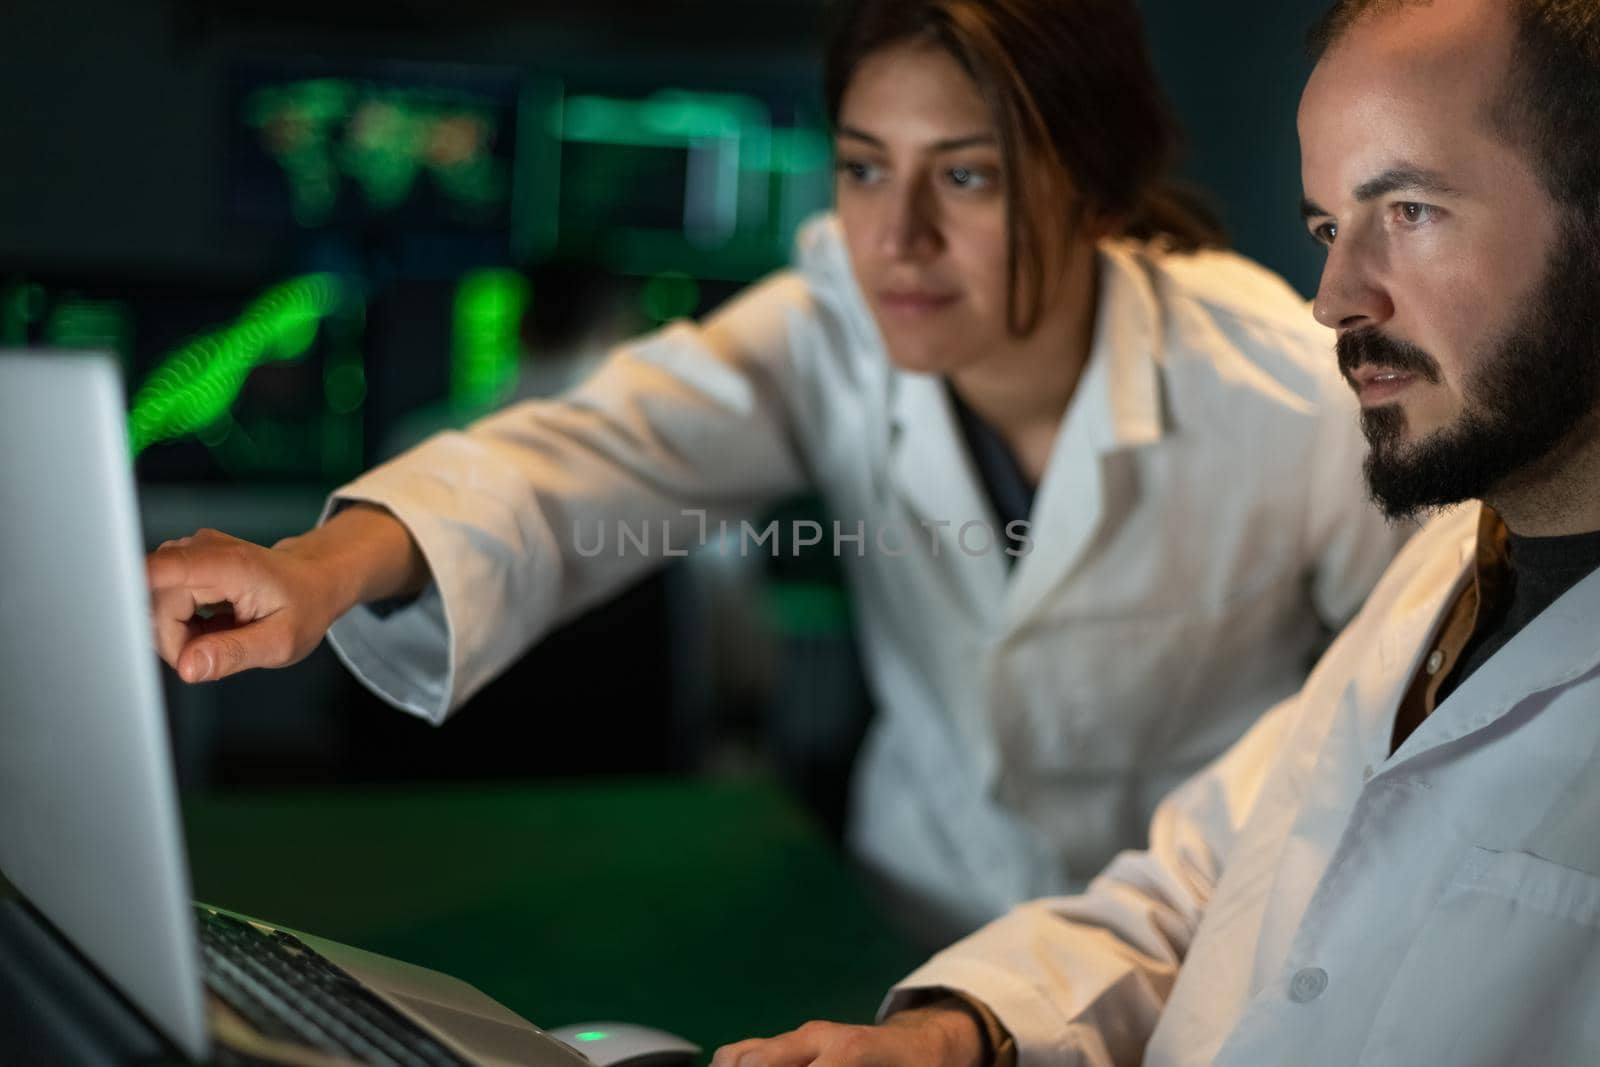 Female scientist shows male doctor colleague some experiment results in the laptop. Working in laboratory. Science and technology concept.